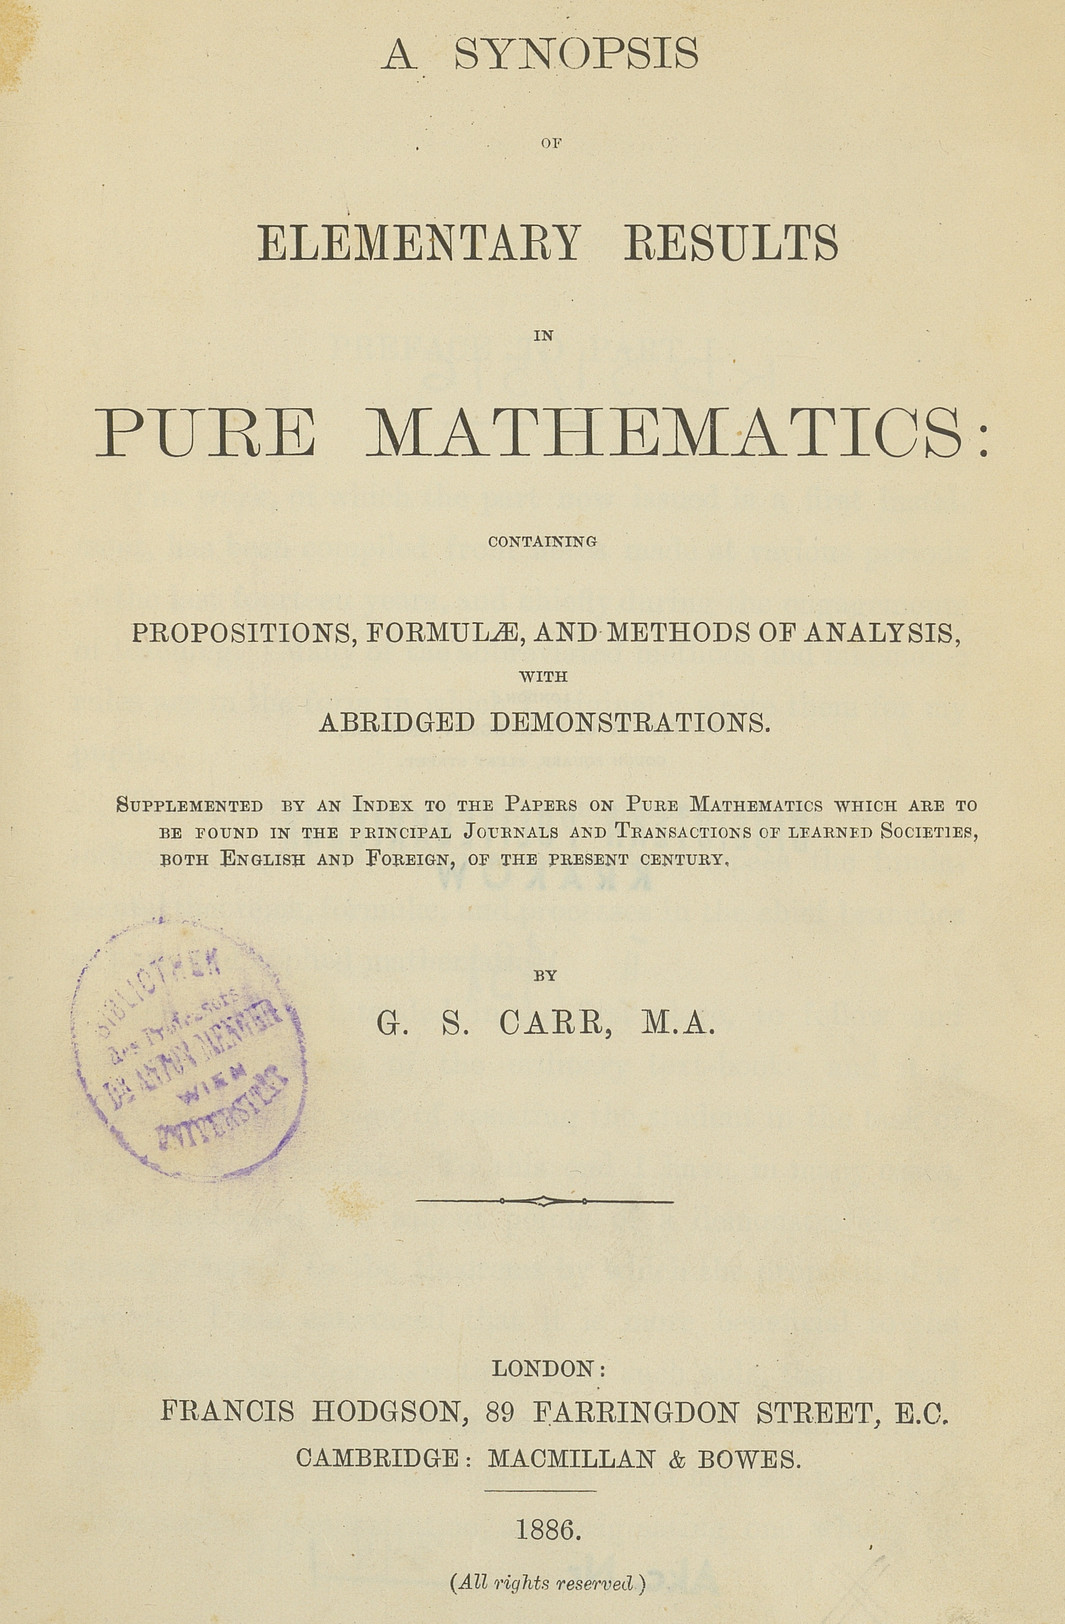 A synopsis of elementary results in pure mathematics : containing propositions. formulæ, and methods of analysis, with abridged demonstrations